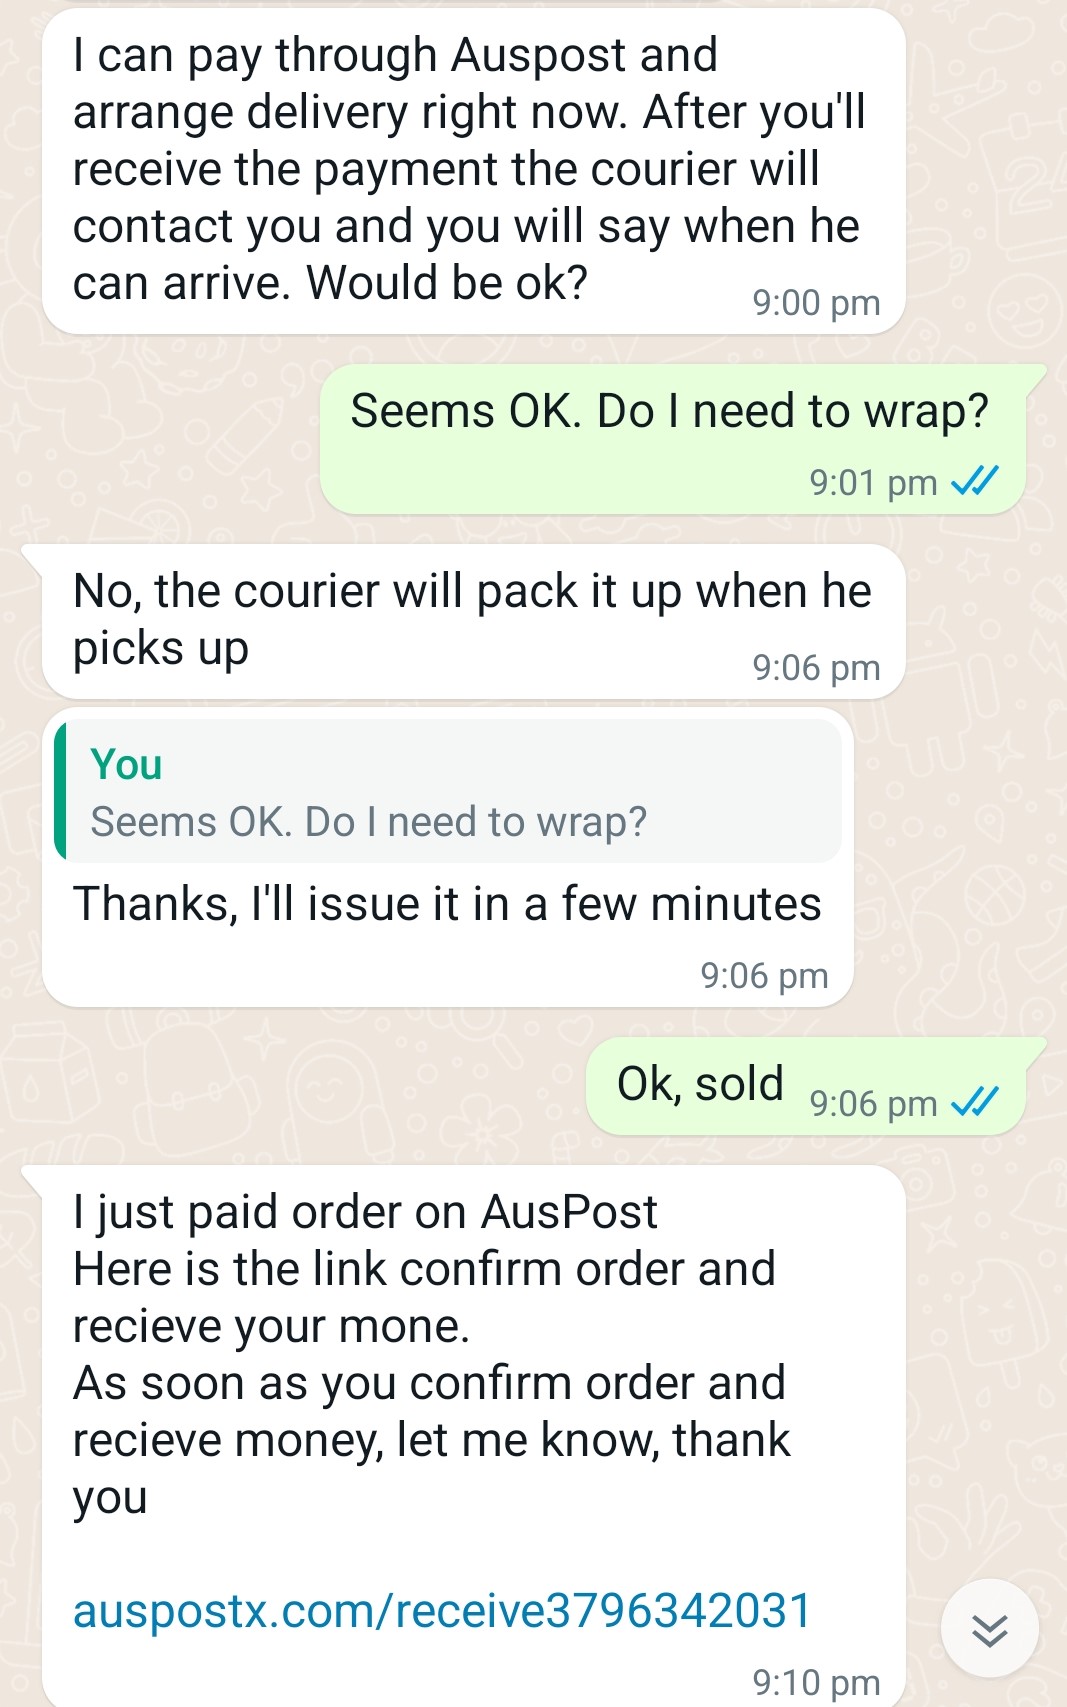 Linda screenshot messages received from a scammer, which included a link to an 'Australia Post' website.